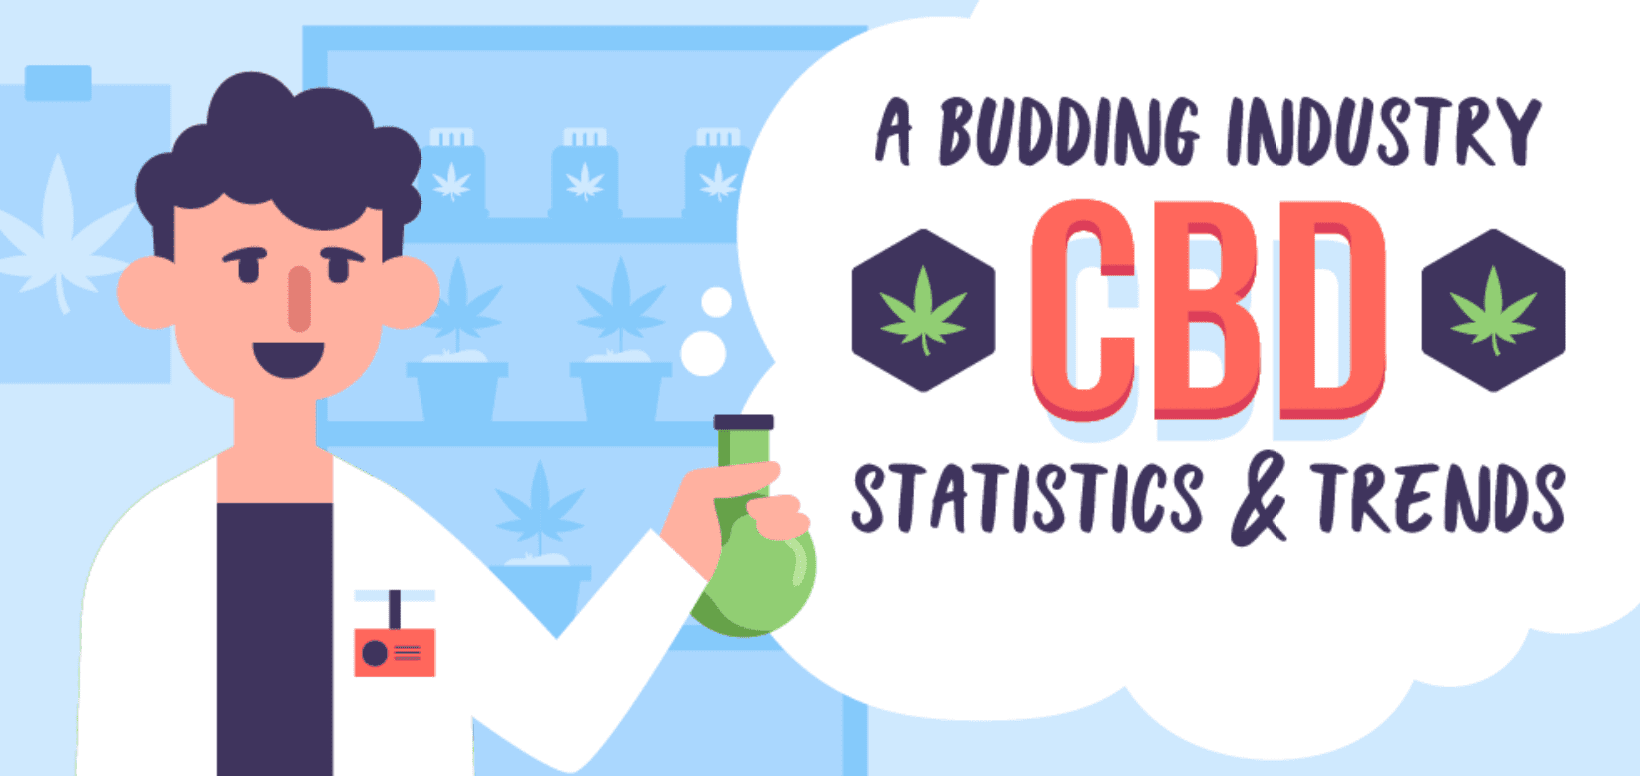 A Budding Industry: CBD Statistics and Trends; graphic courtesy of author.